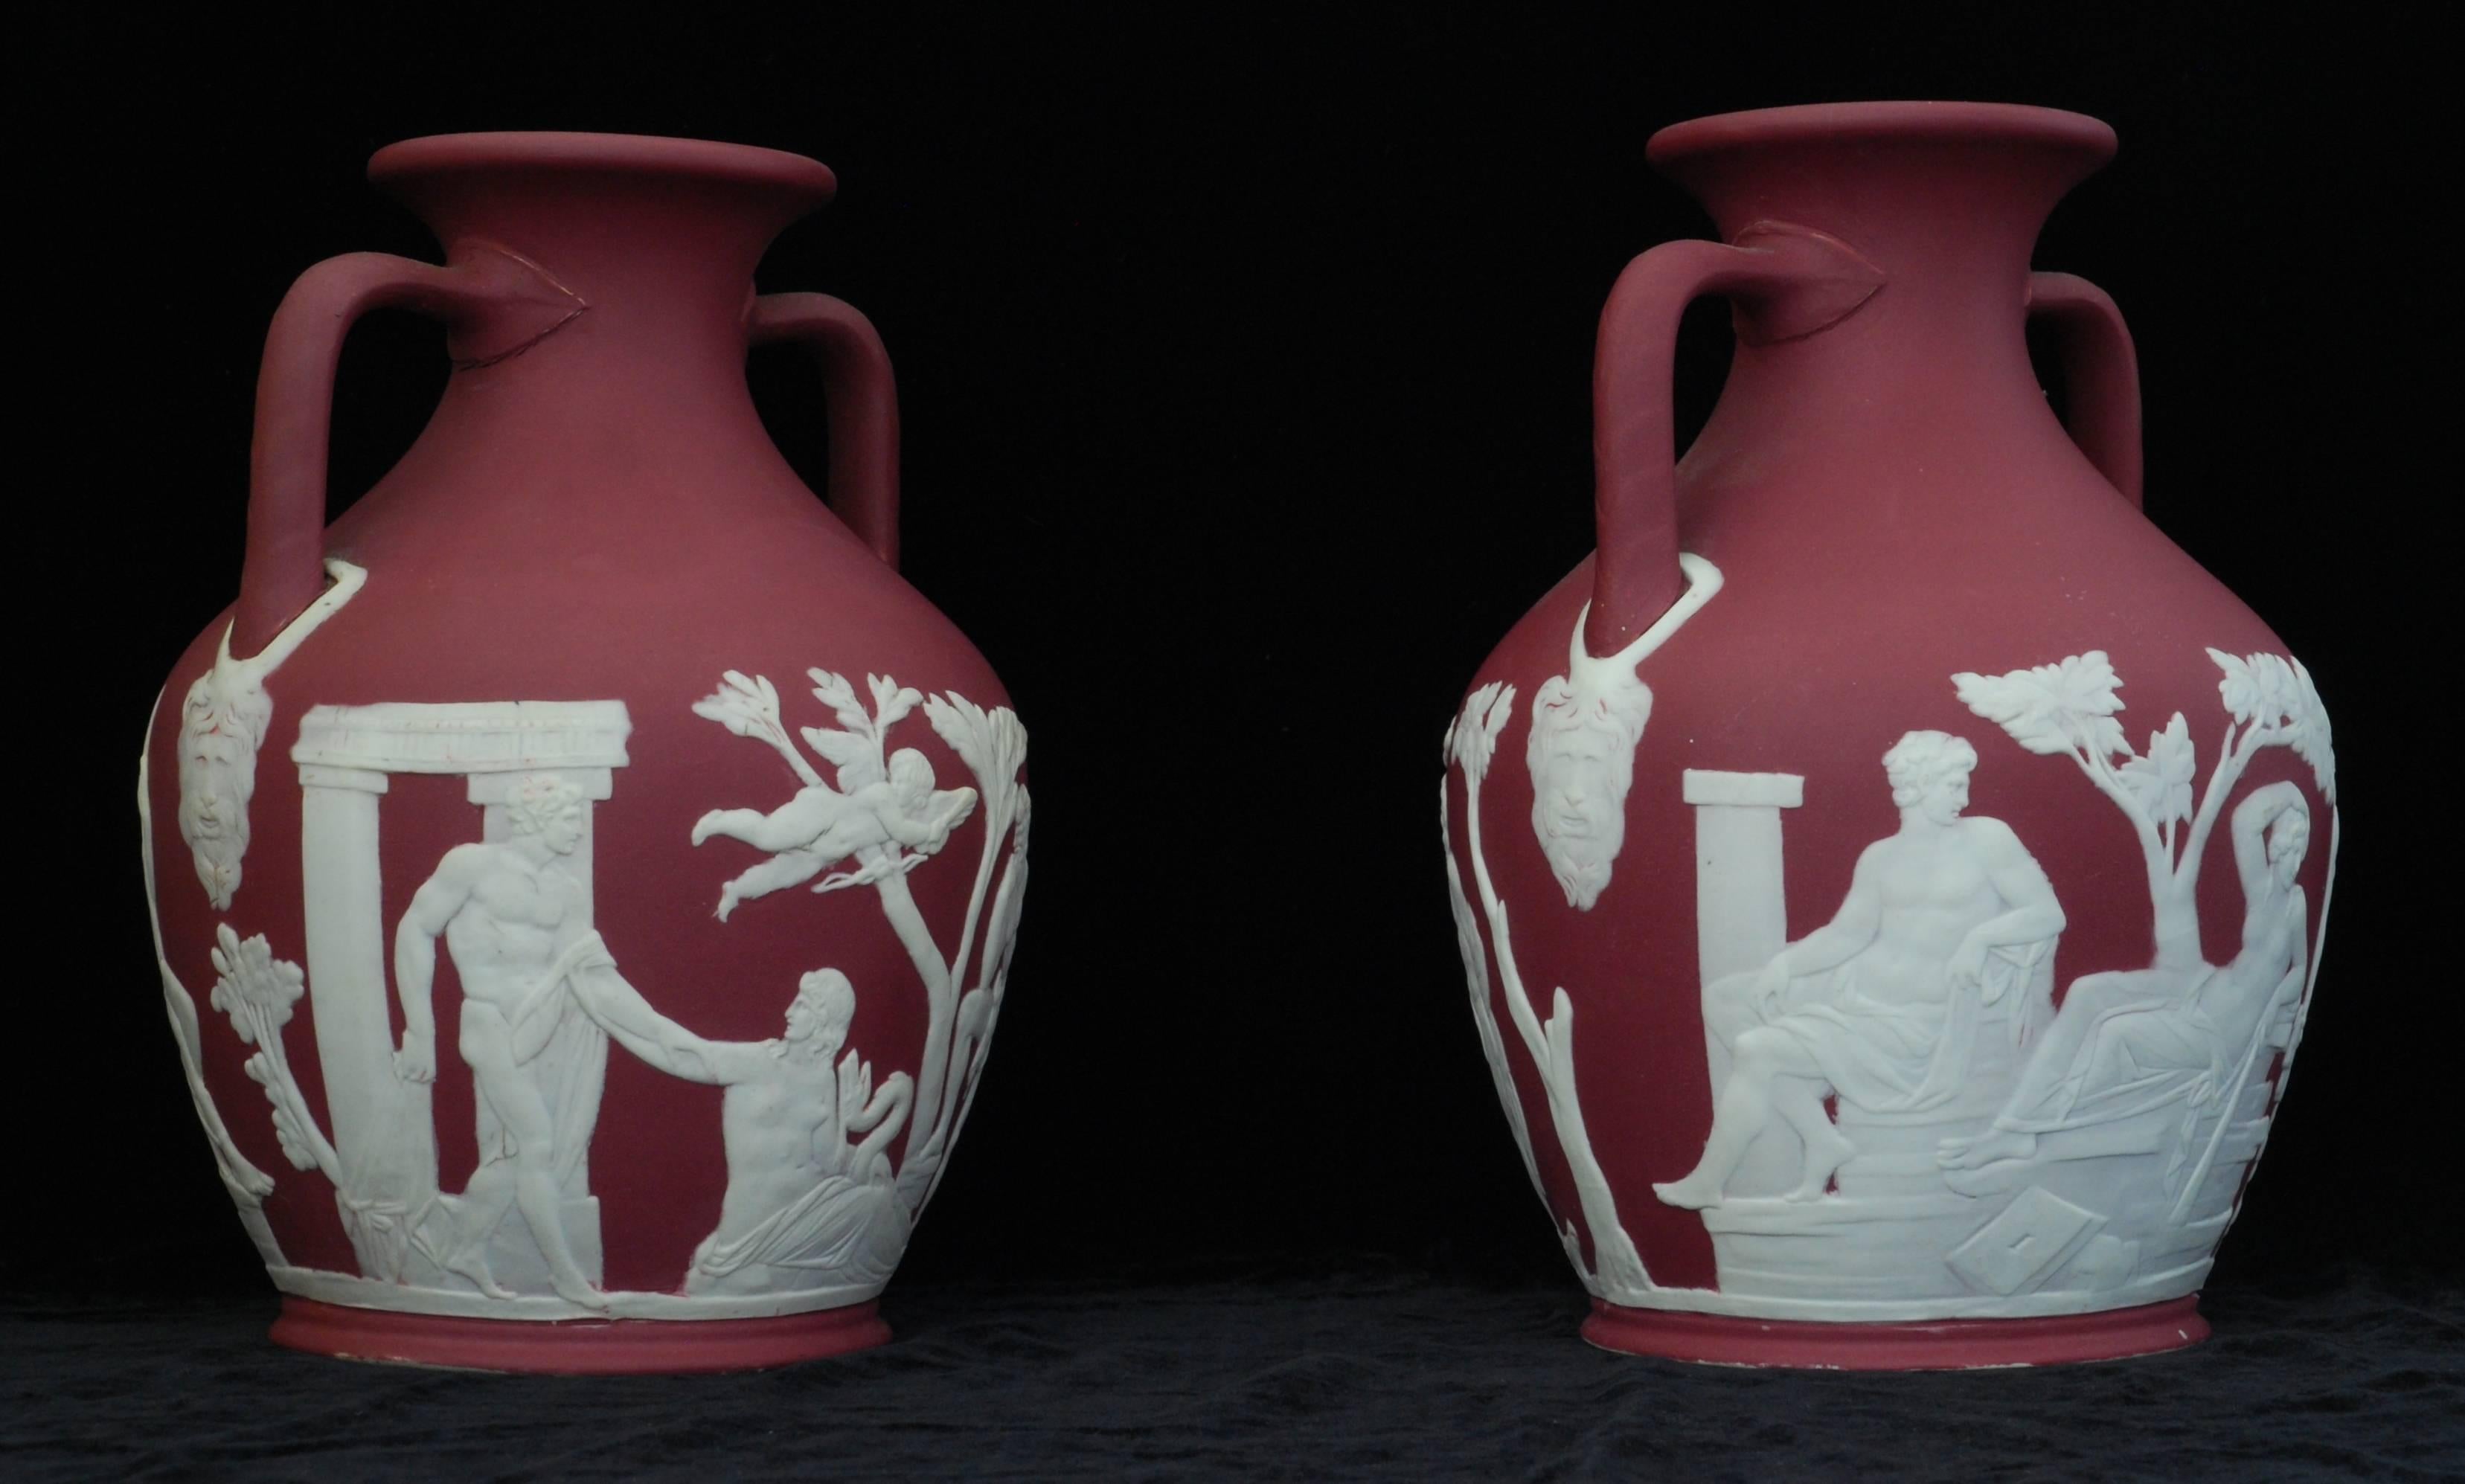 A pair of Portland Vases in crimson jasper dip. Both of them superb, without the usual losses or bleeding associated with this ill-fated colour.

Crimson was one of the experimental colours introduced by Harry Barnard at Wedgwood in the early